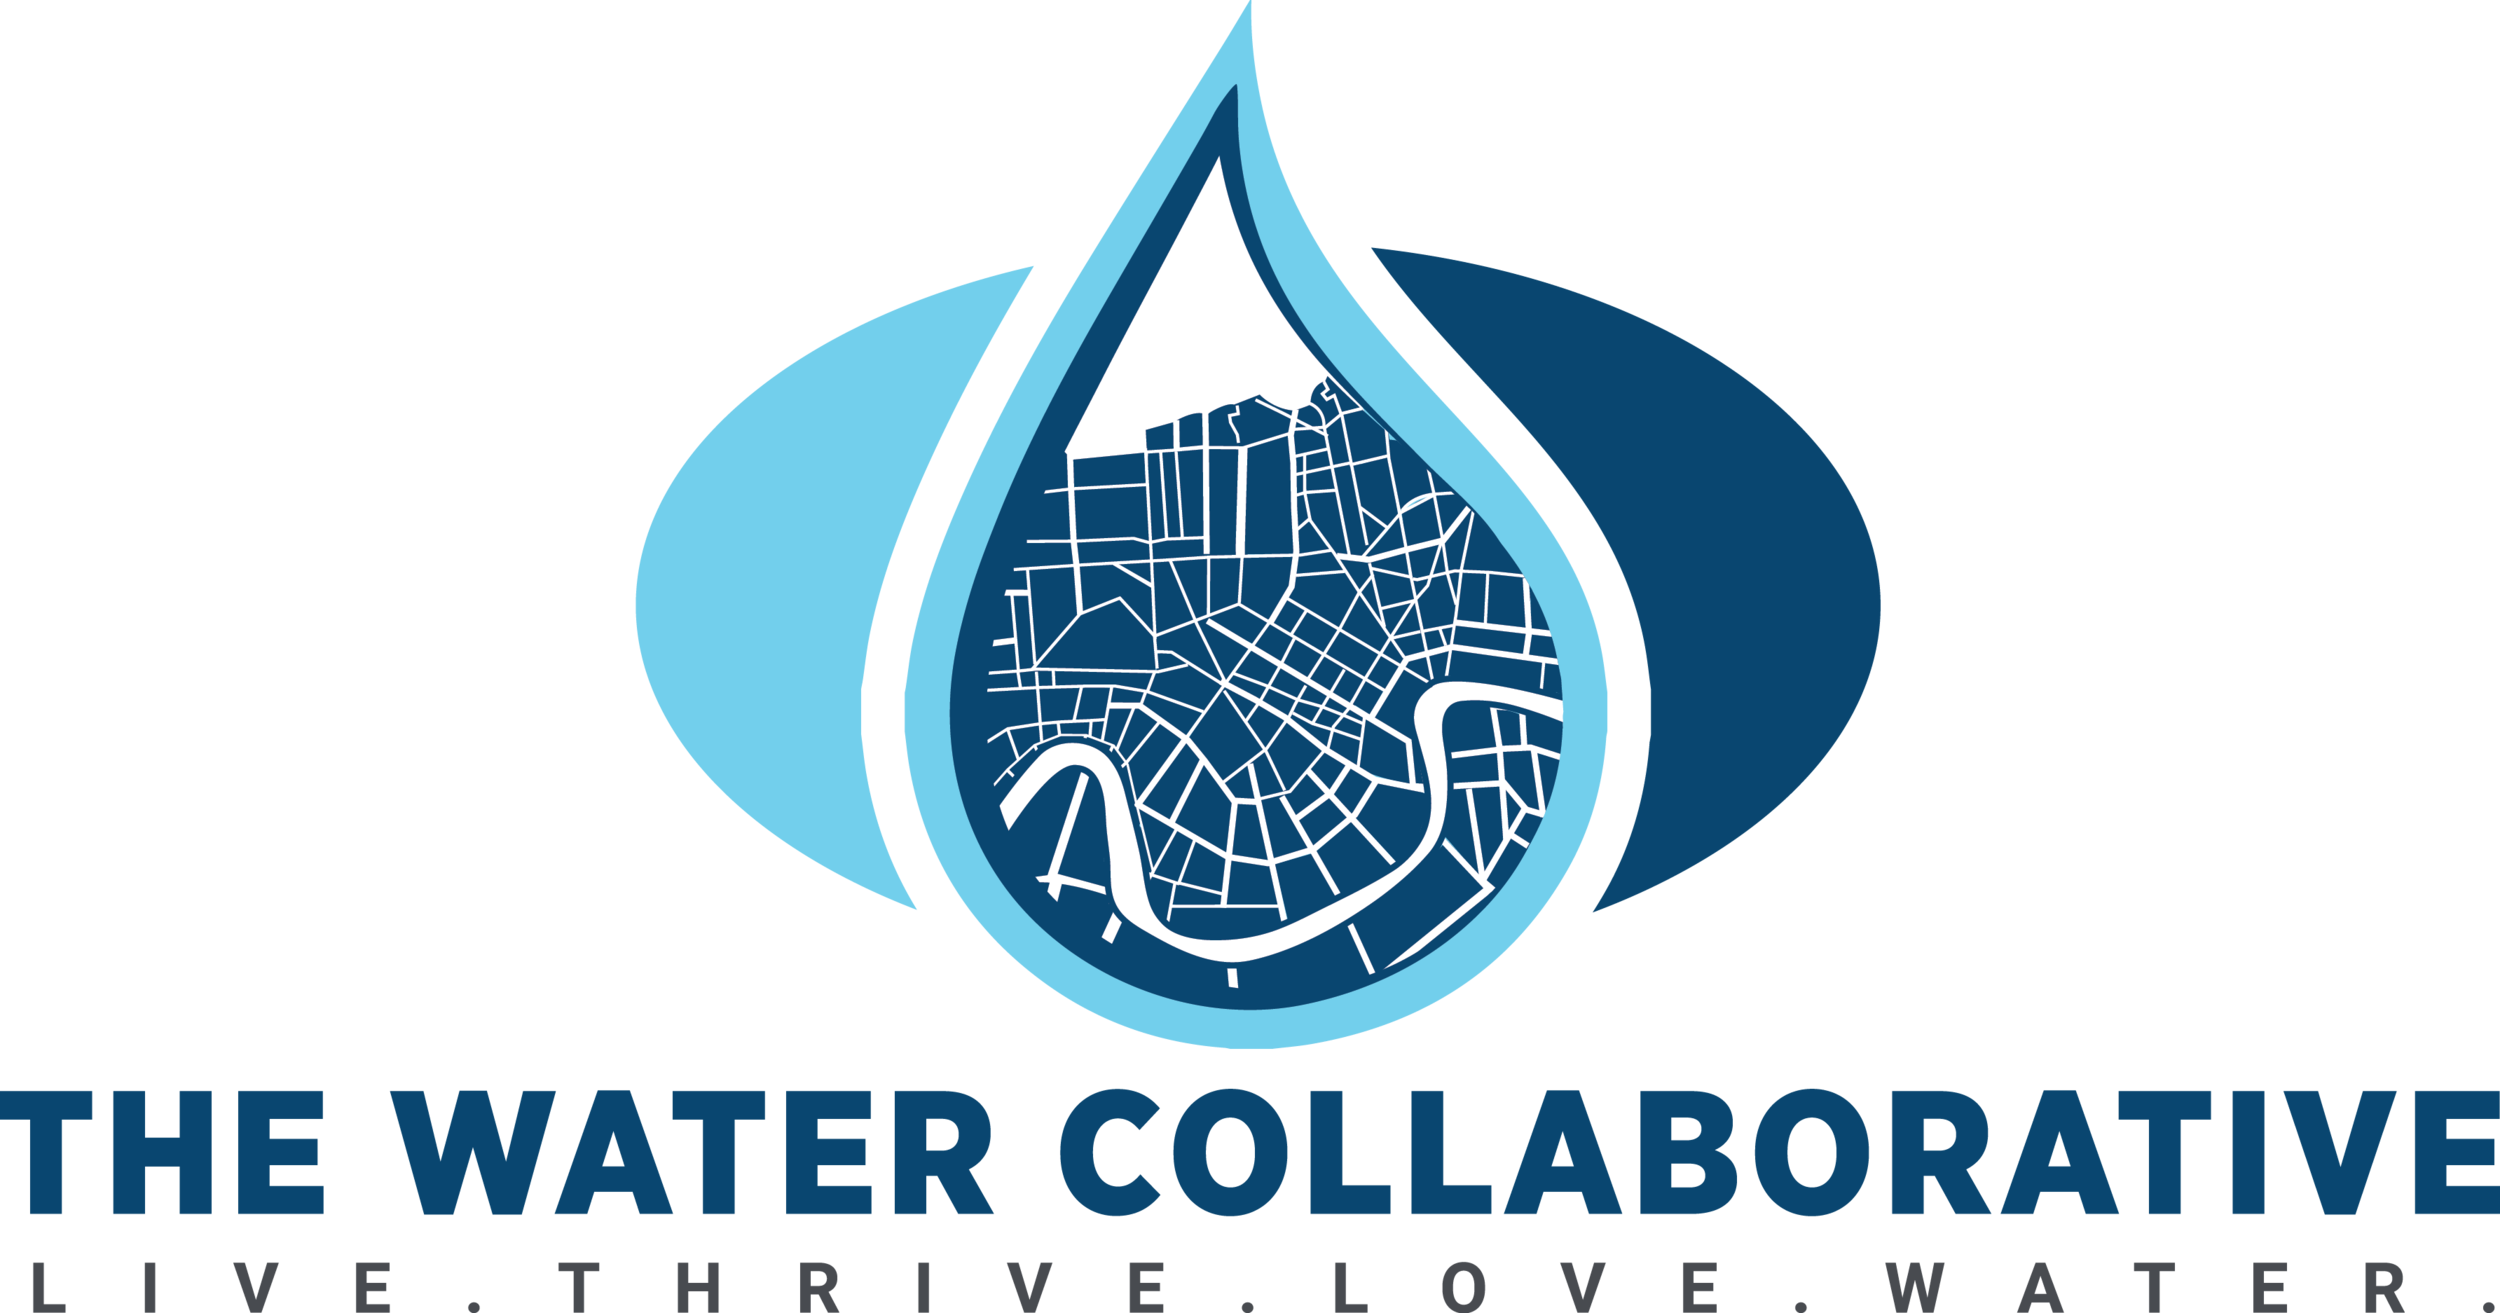 The Water Collaborative